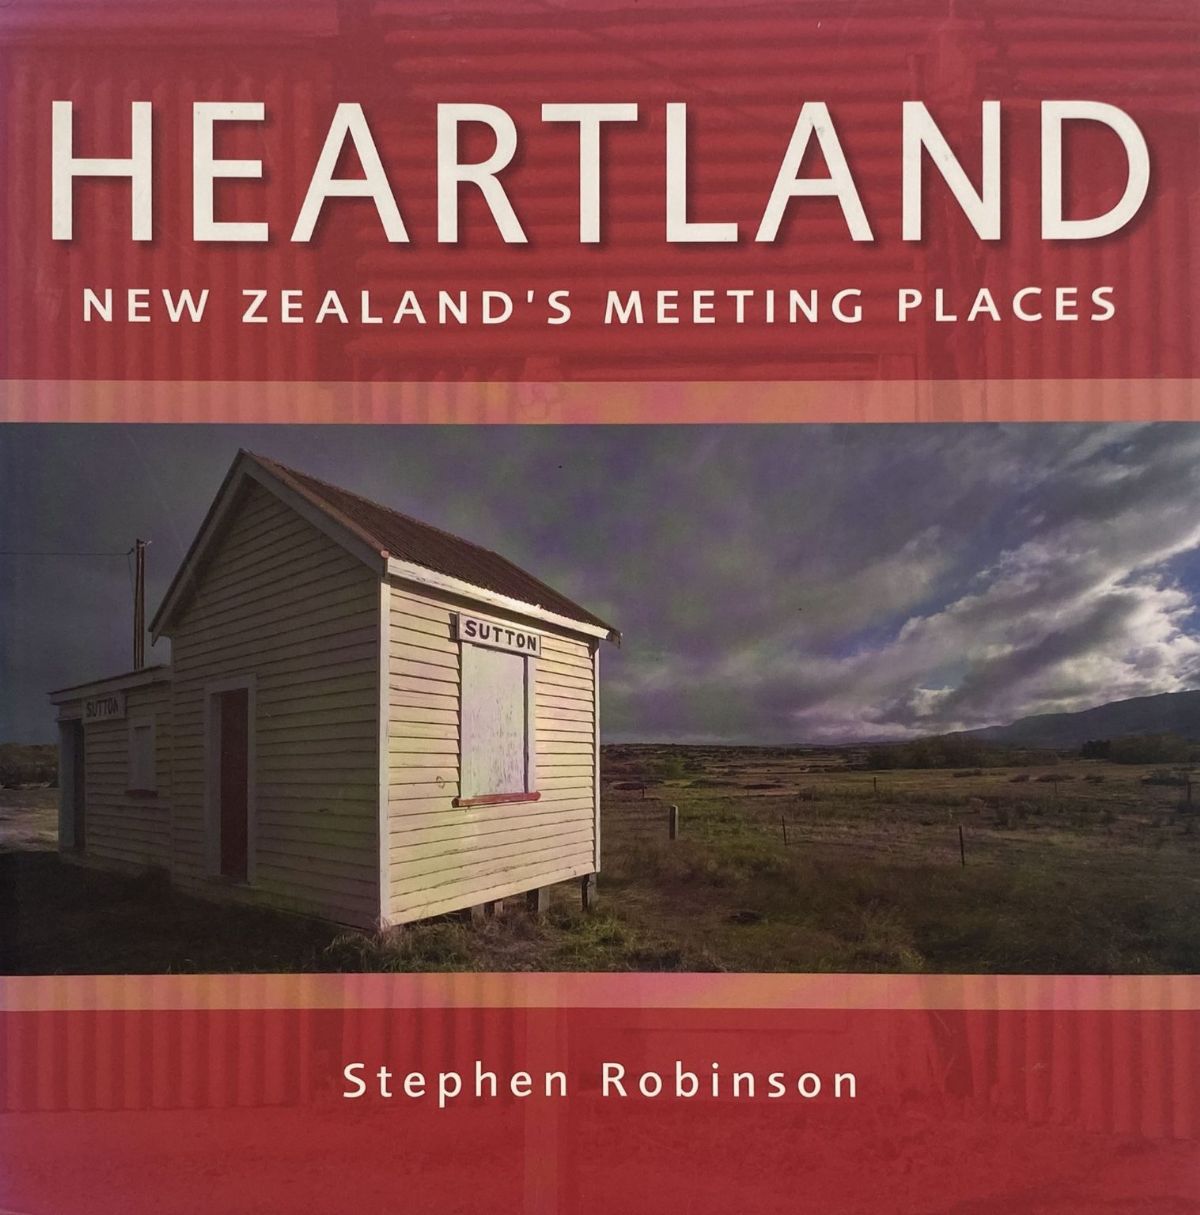 HEARTLAND: New Zealand's Meeting Places